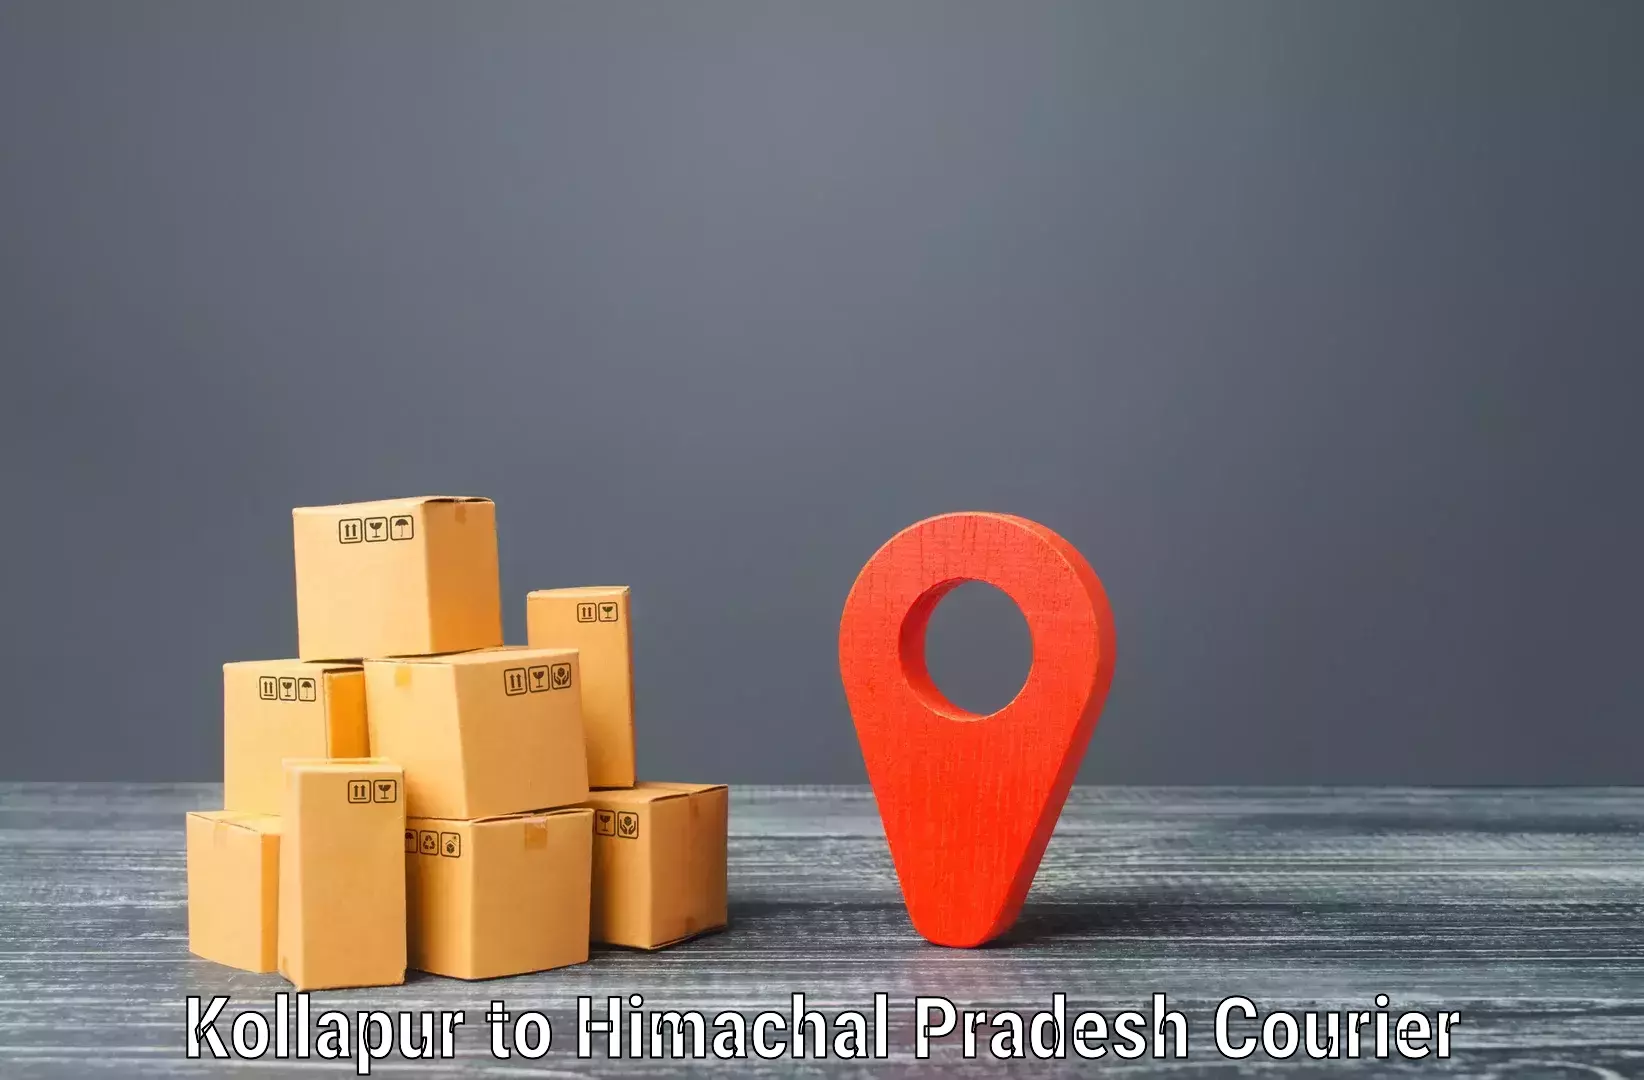 Advanced courier platforms in Kollapur to Dheera